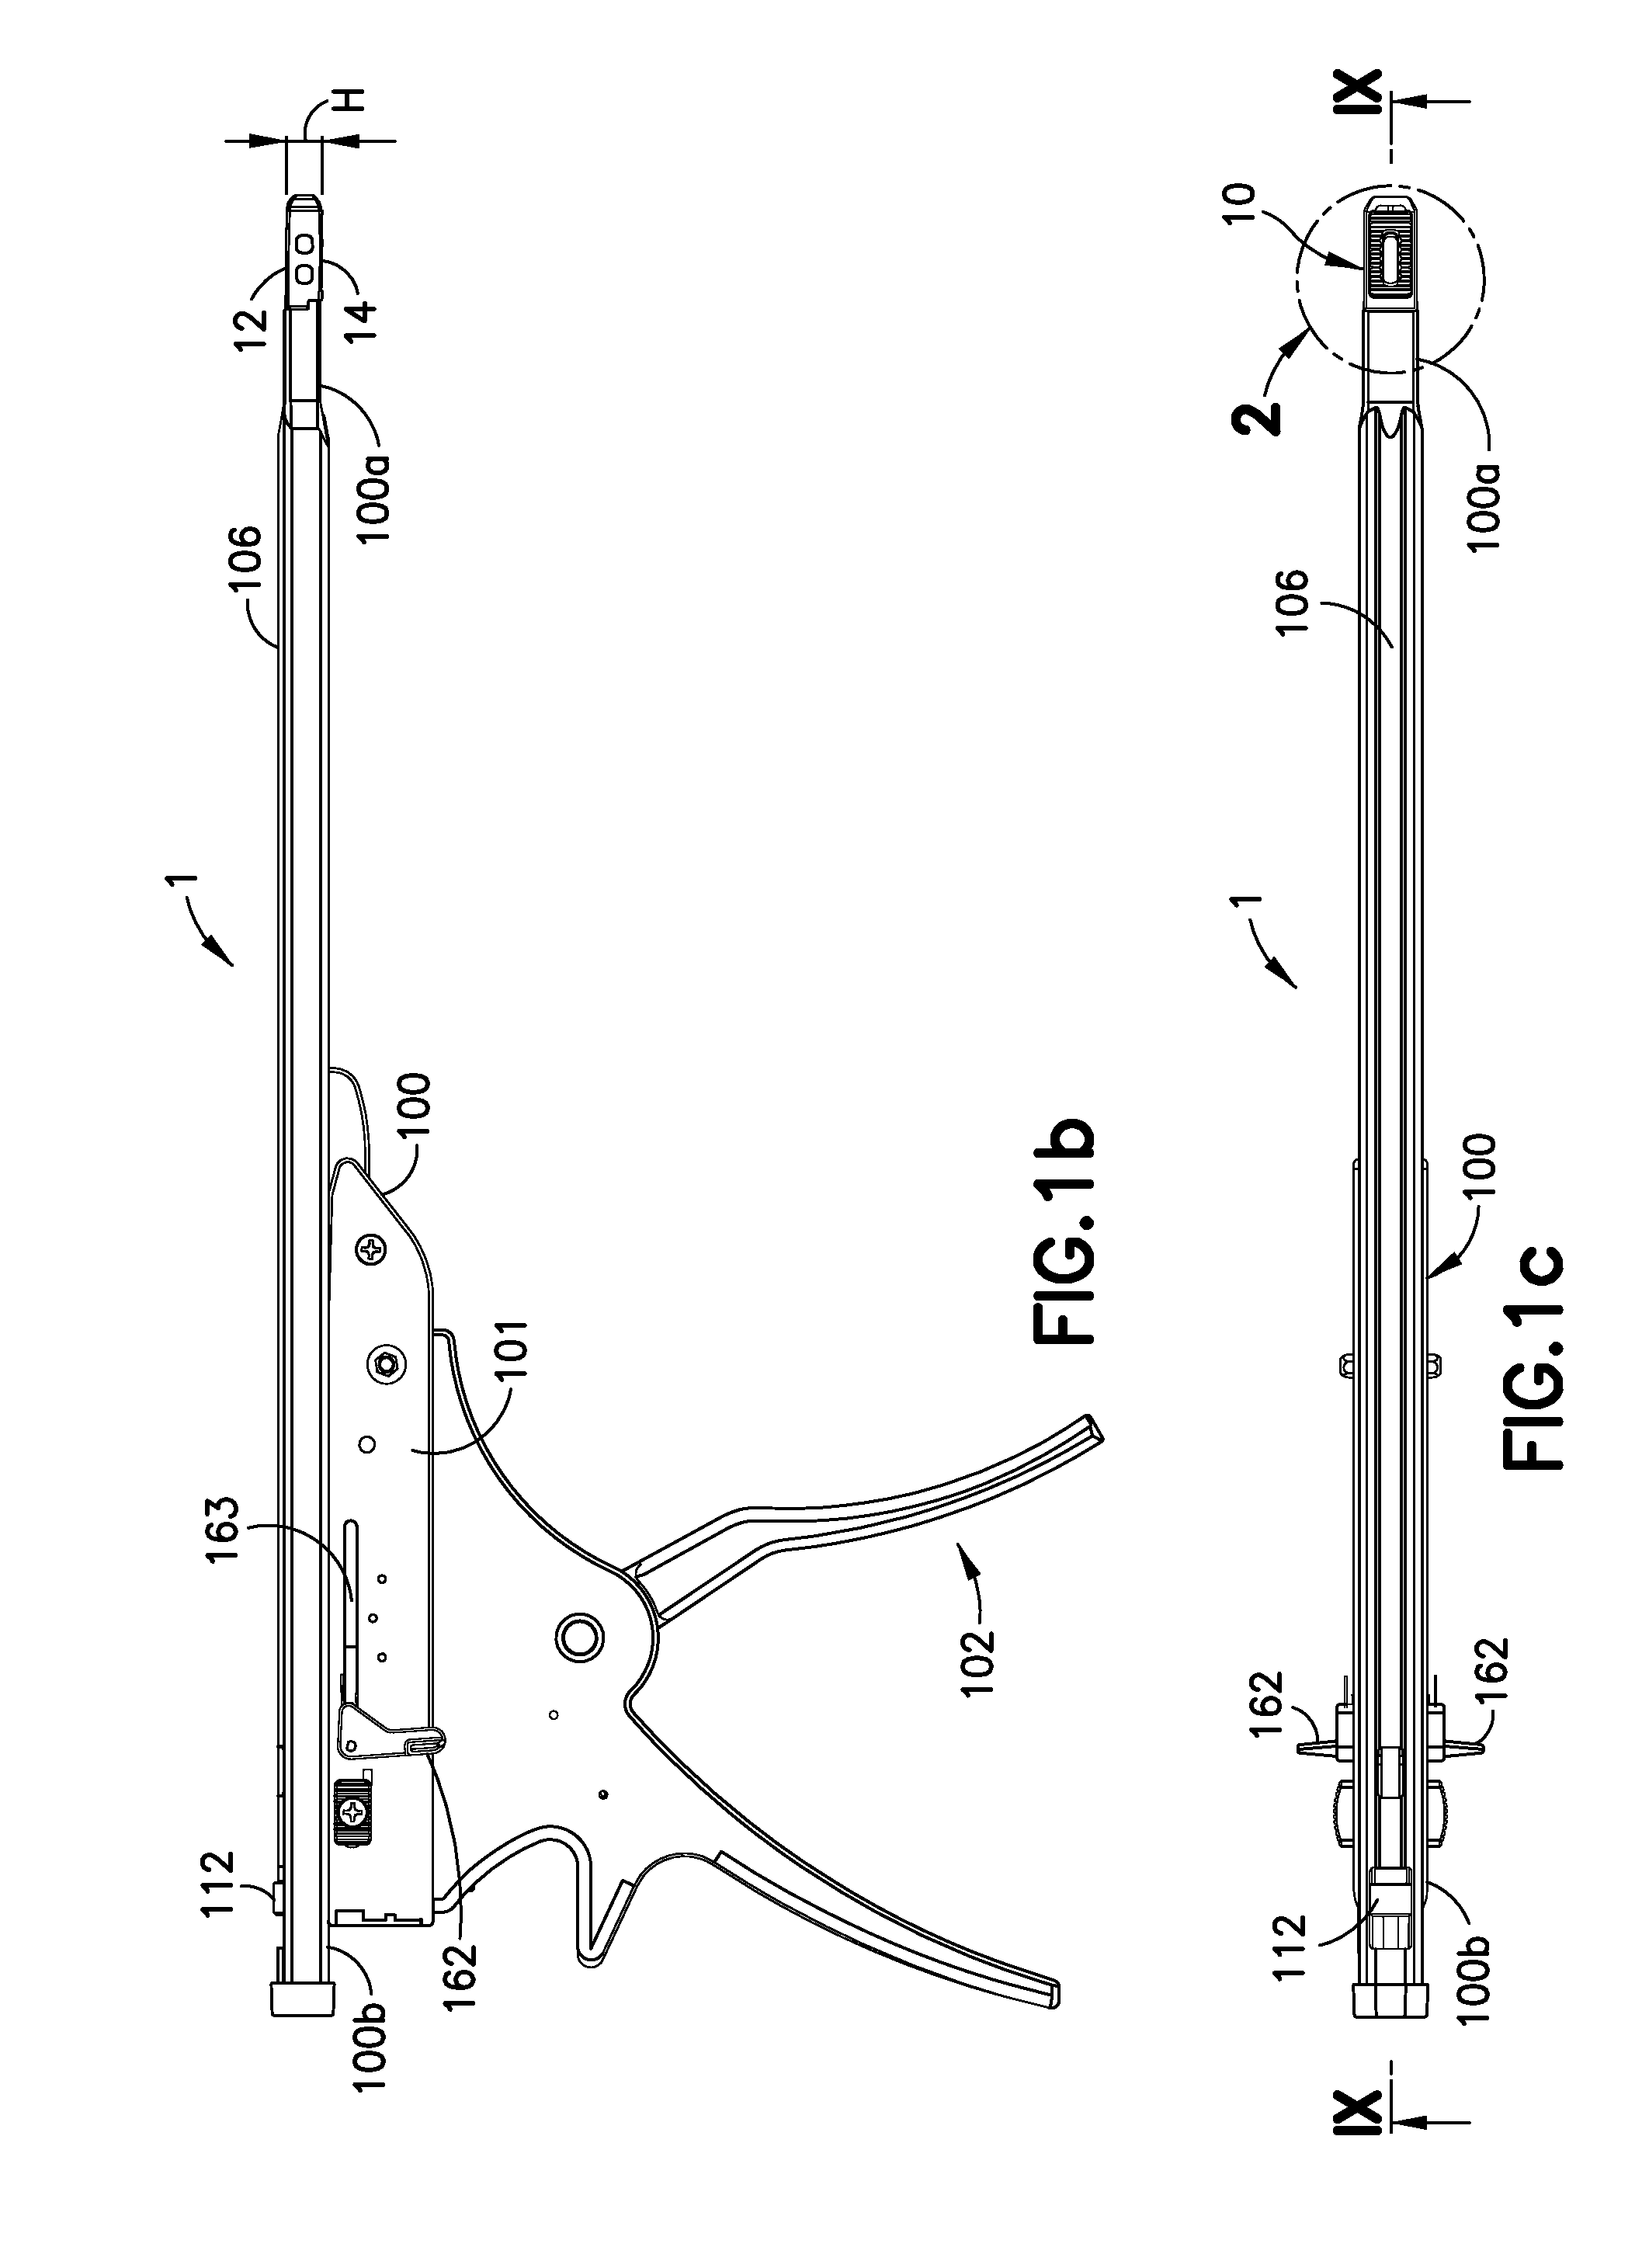 Method of expanding a spinal interbody fusion device